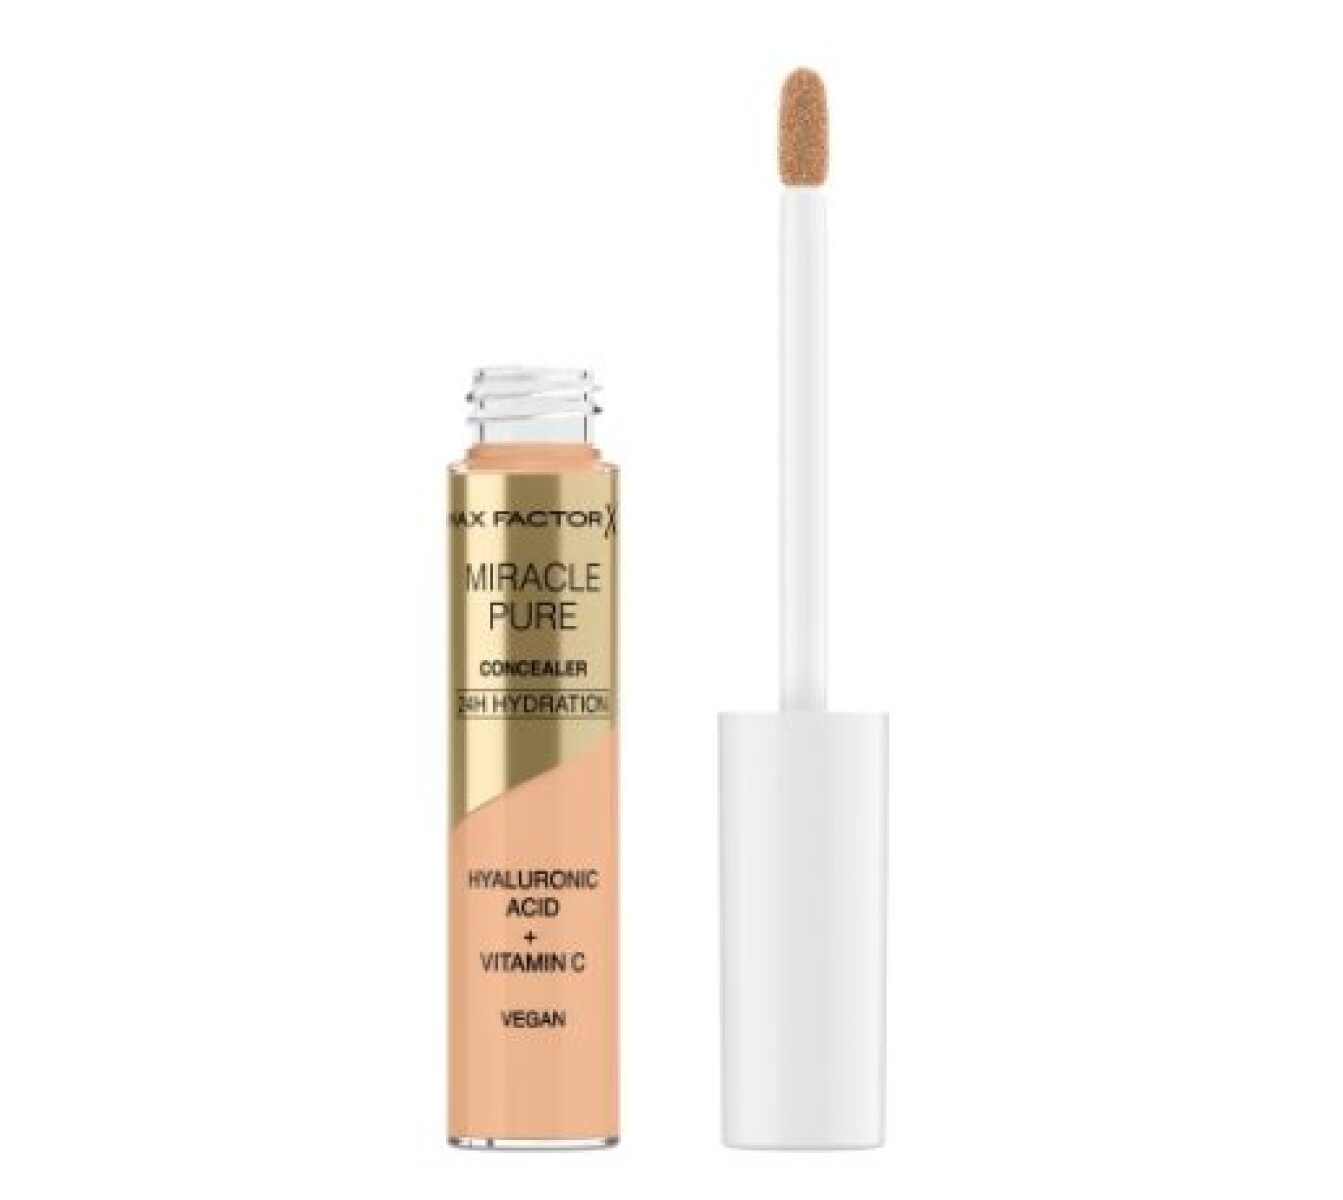 Max Factor Miracle Pure Concealer 010 